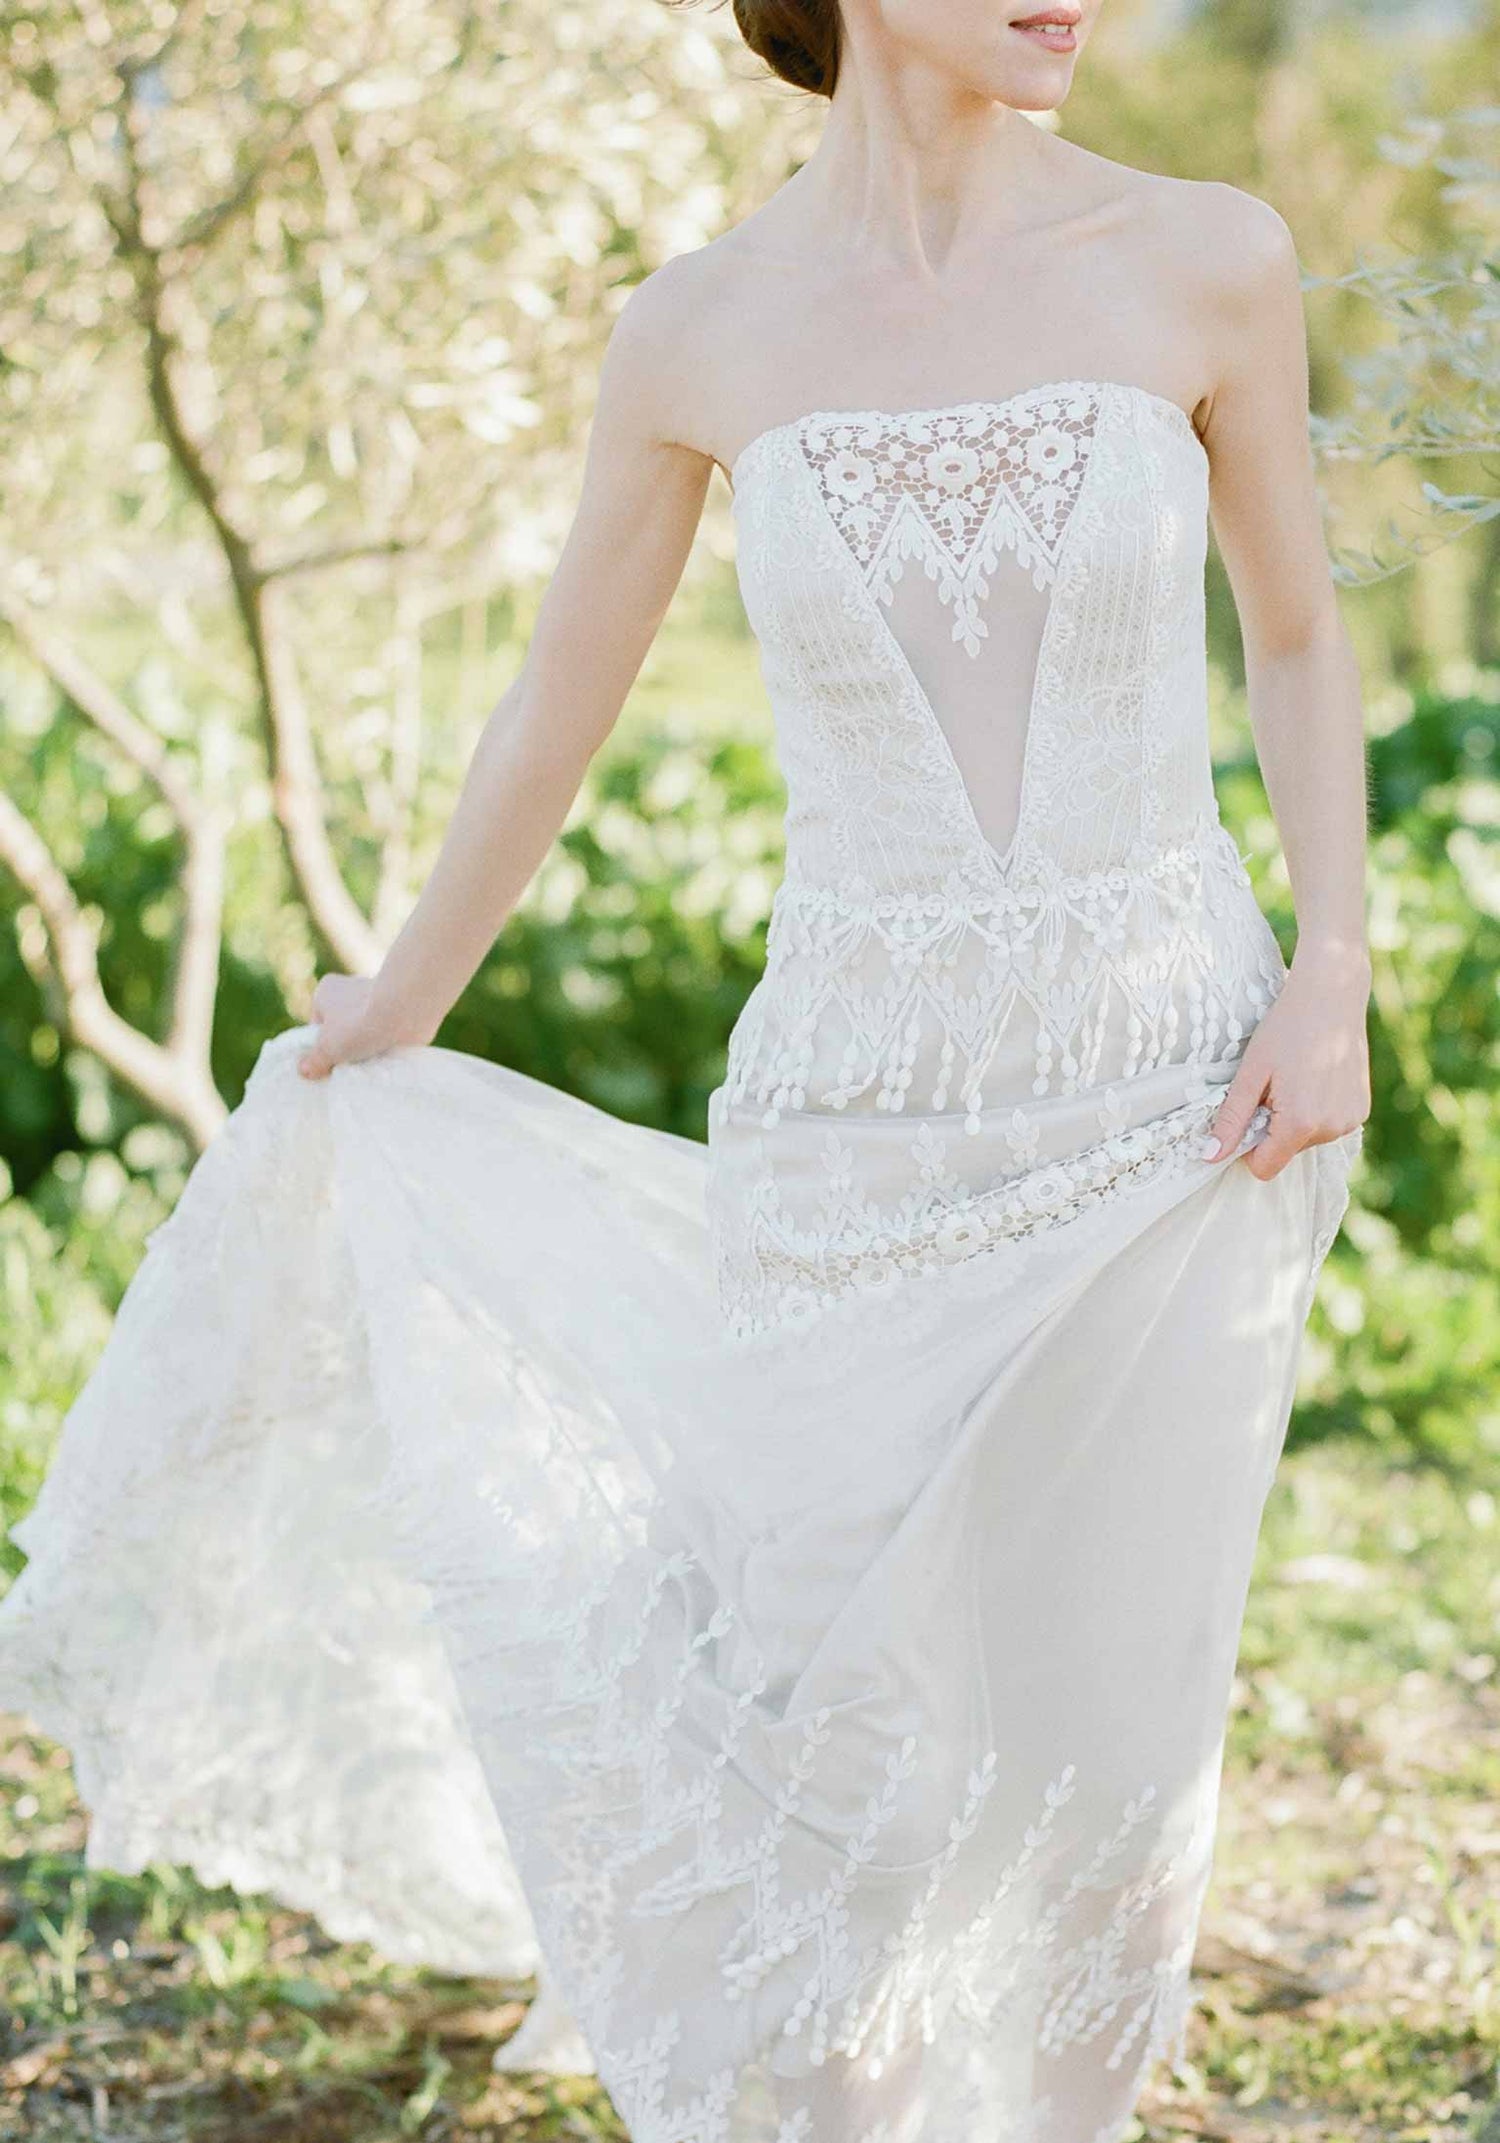 Victoriana Vintage Inspired Bridal Gown